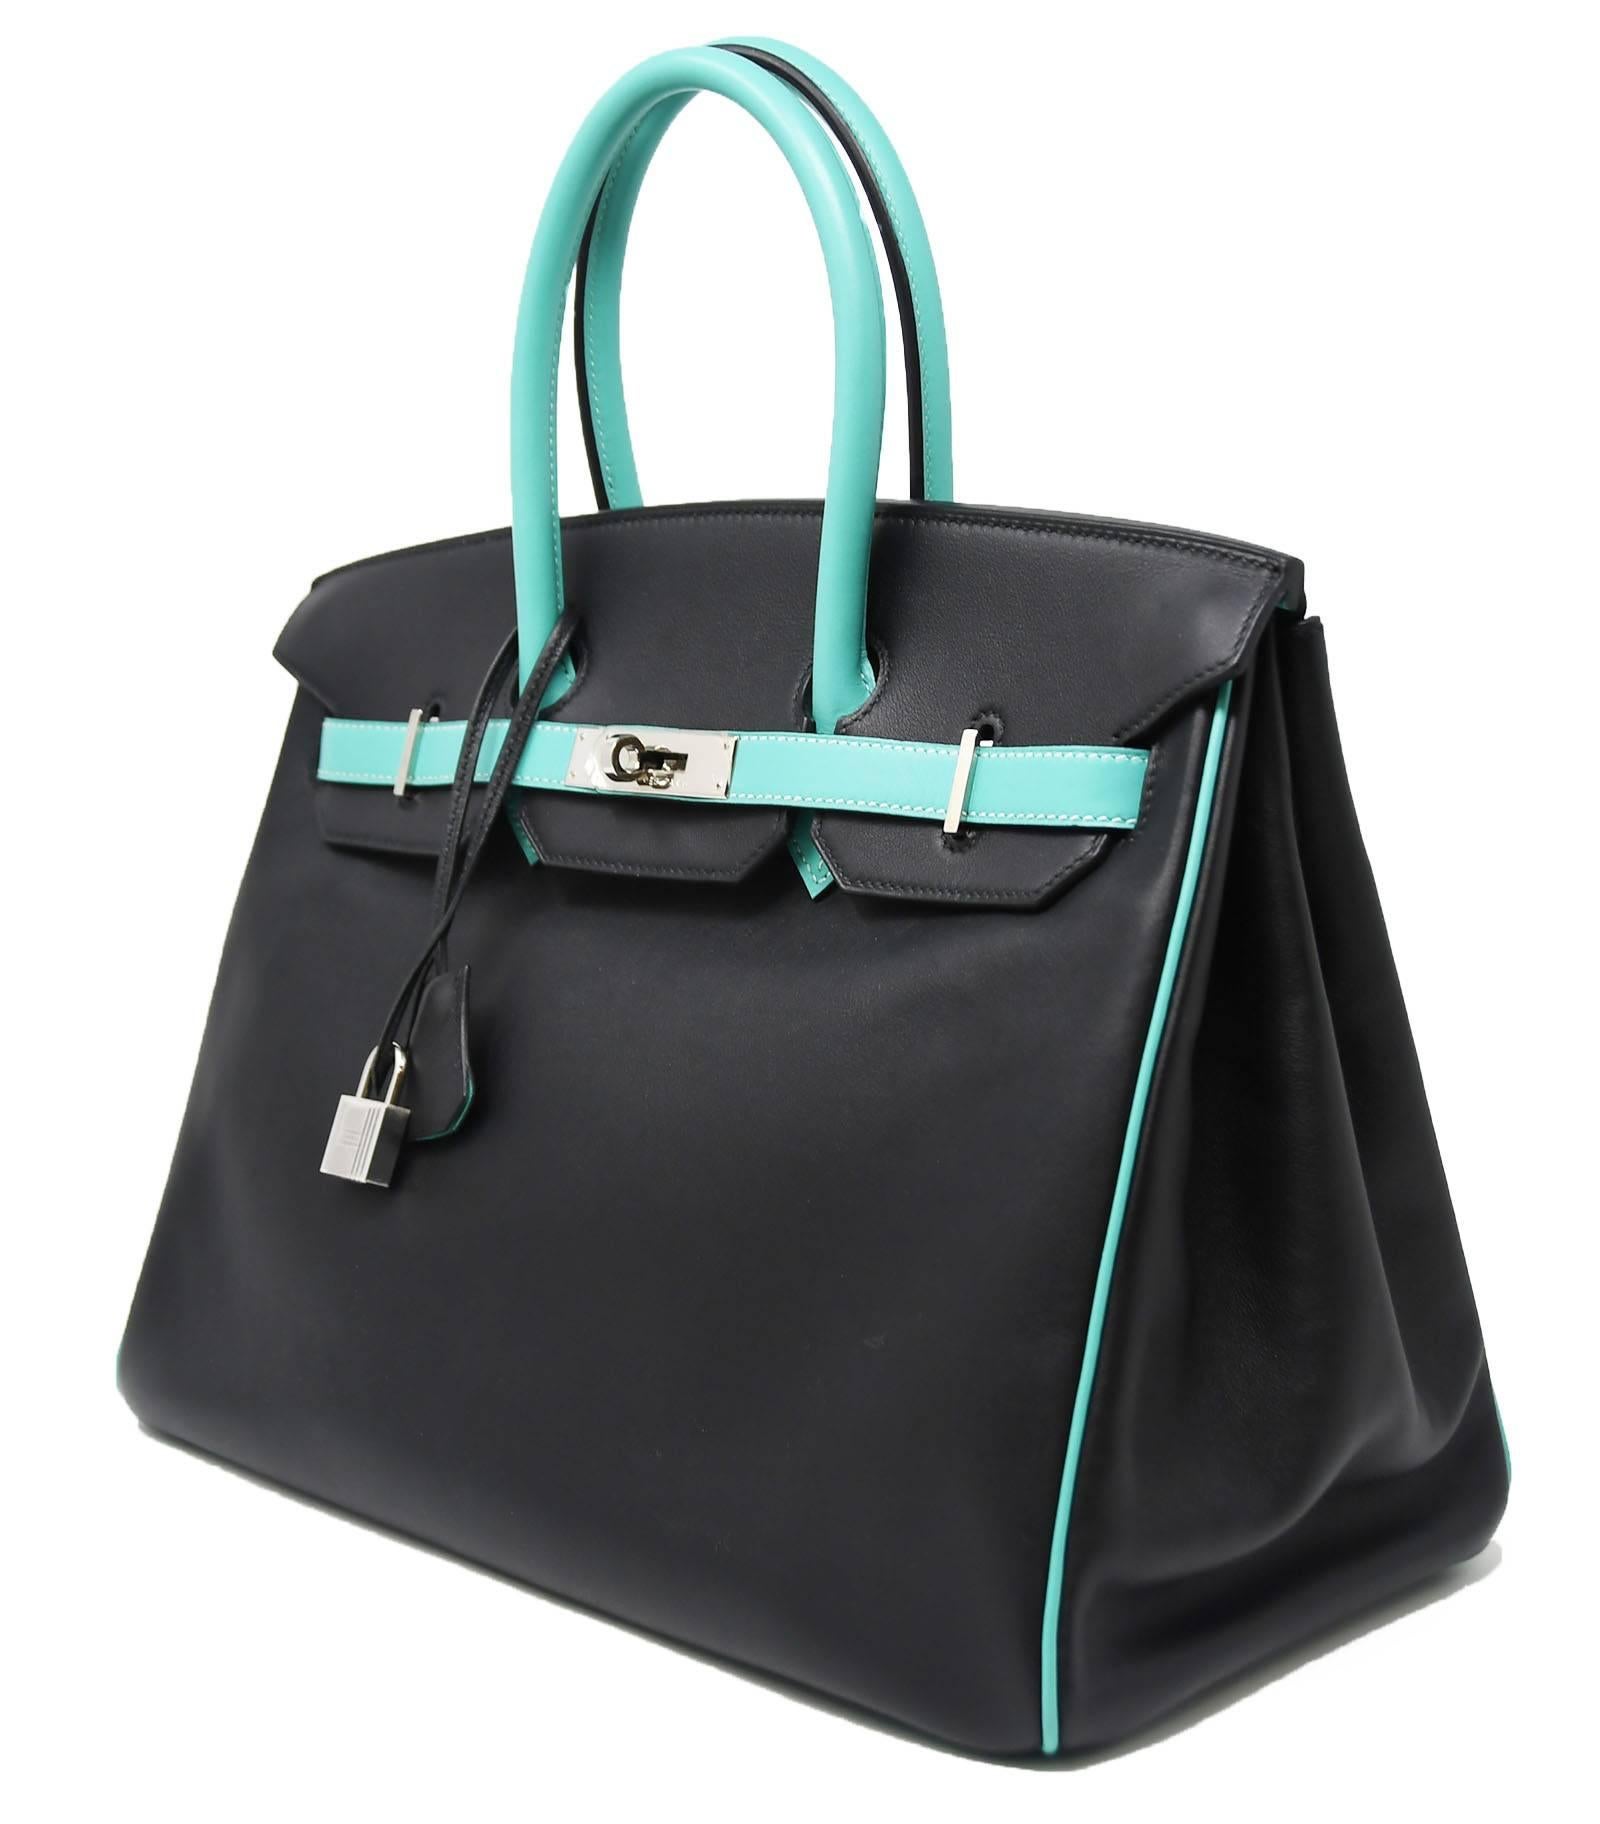 Do not miss out on the opportunity to own this extremely rare horseshoe Birkin bag.  This coveted bicolor bag features a stunning lagoon color and classic black.  Brand new with plastic on the hardware.  A true collectors item.